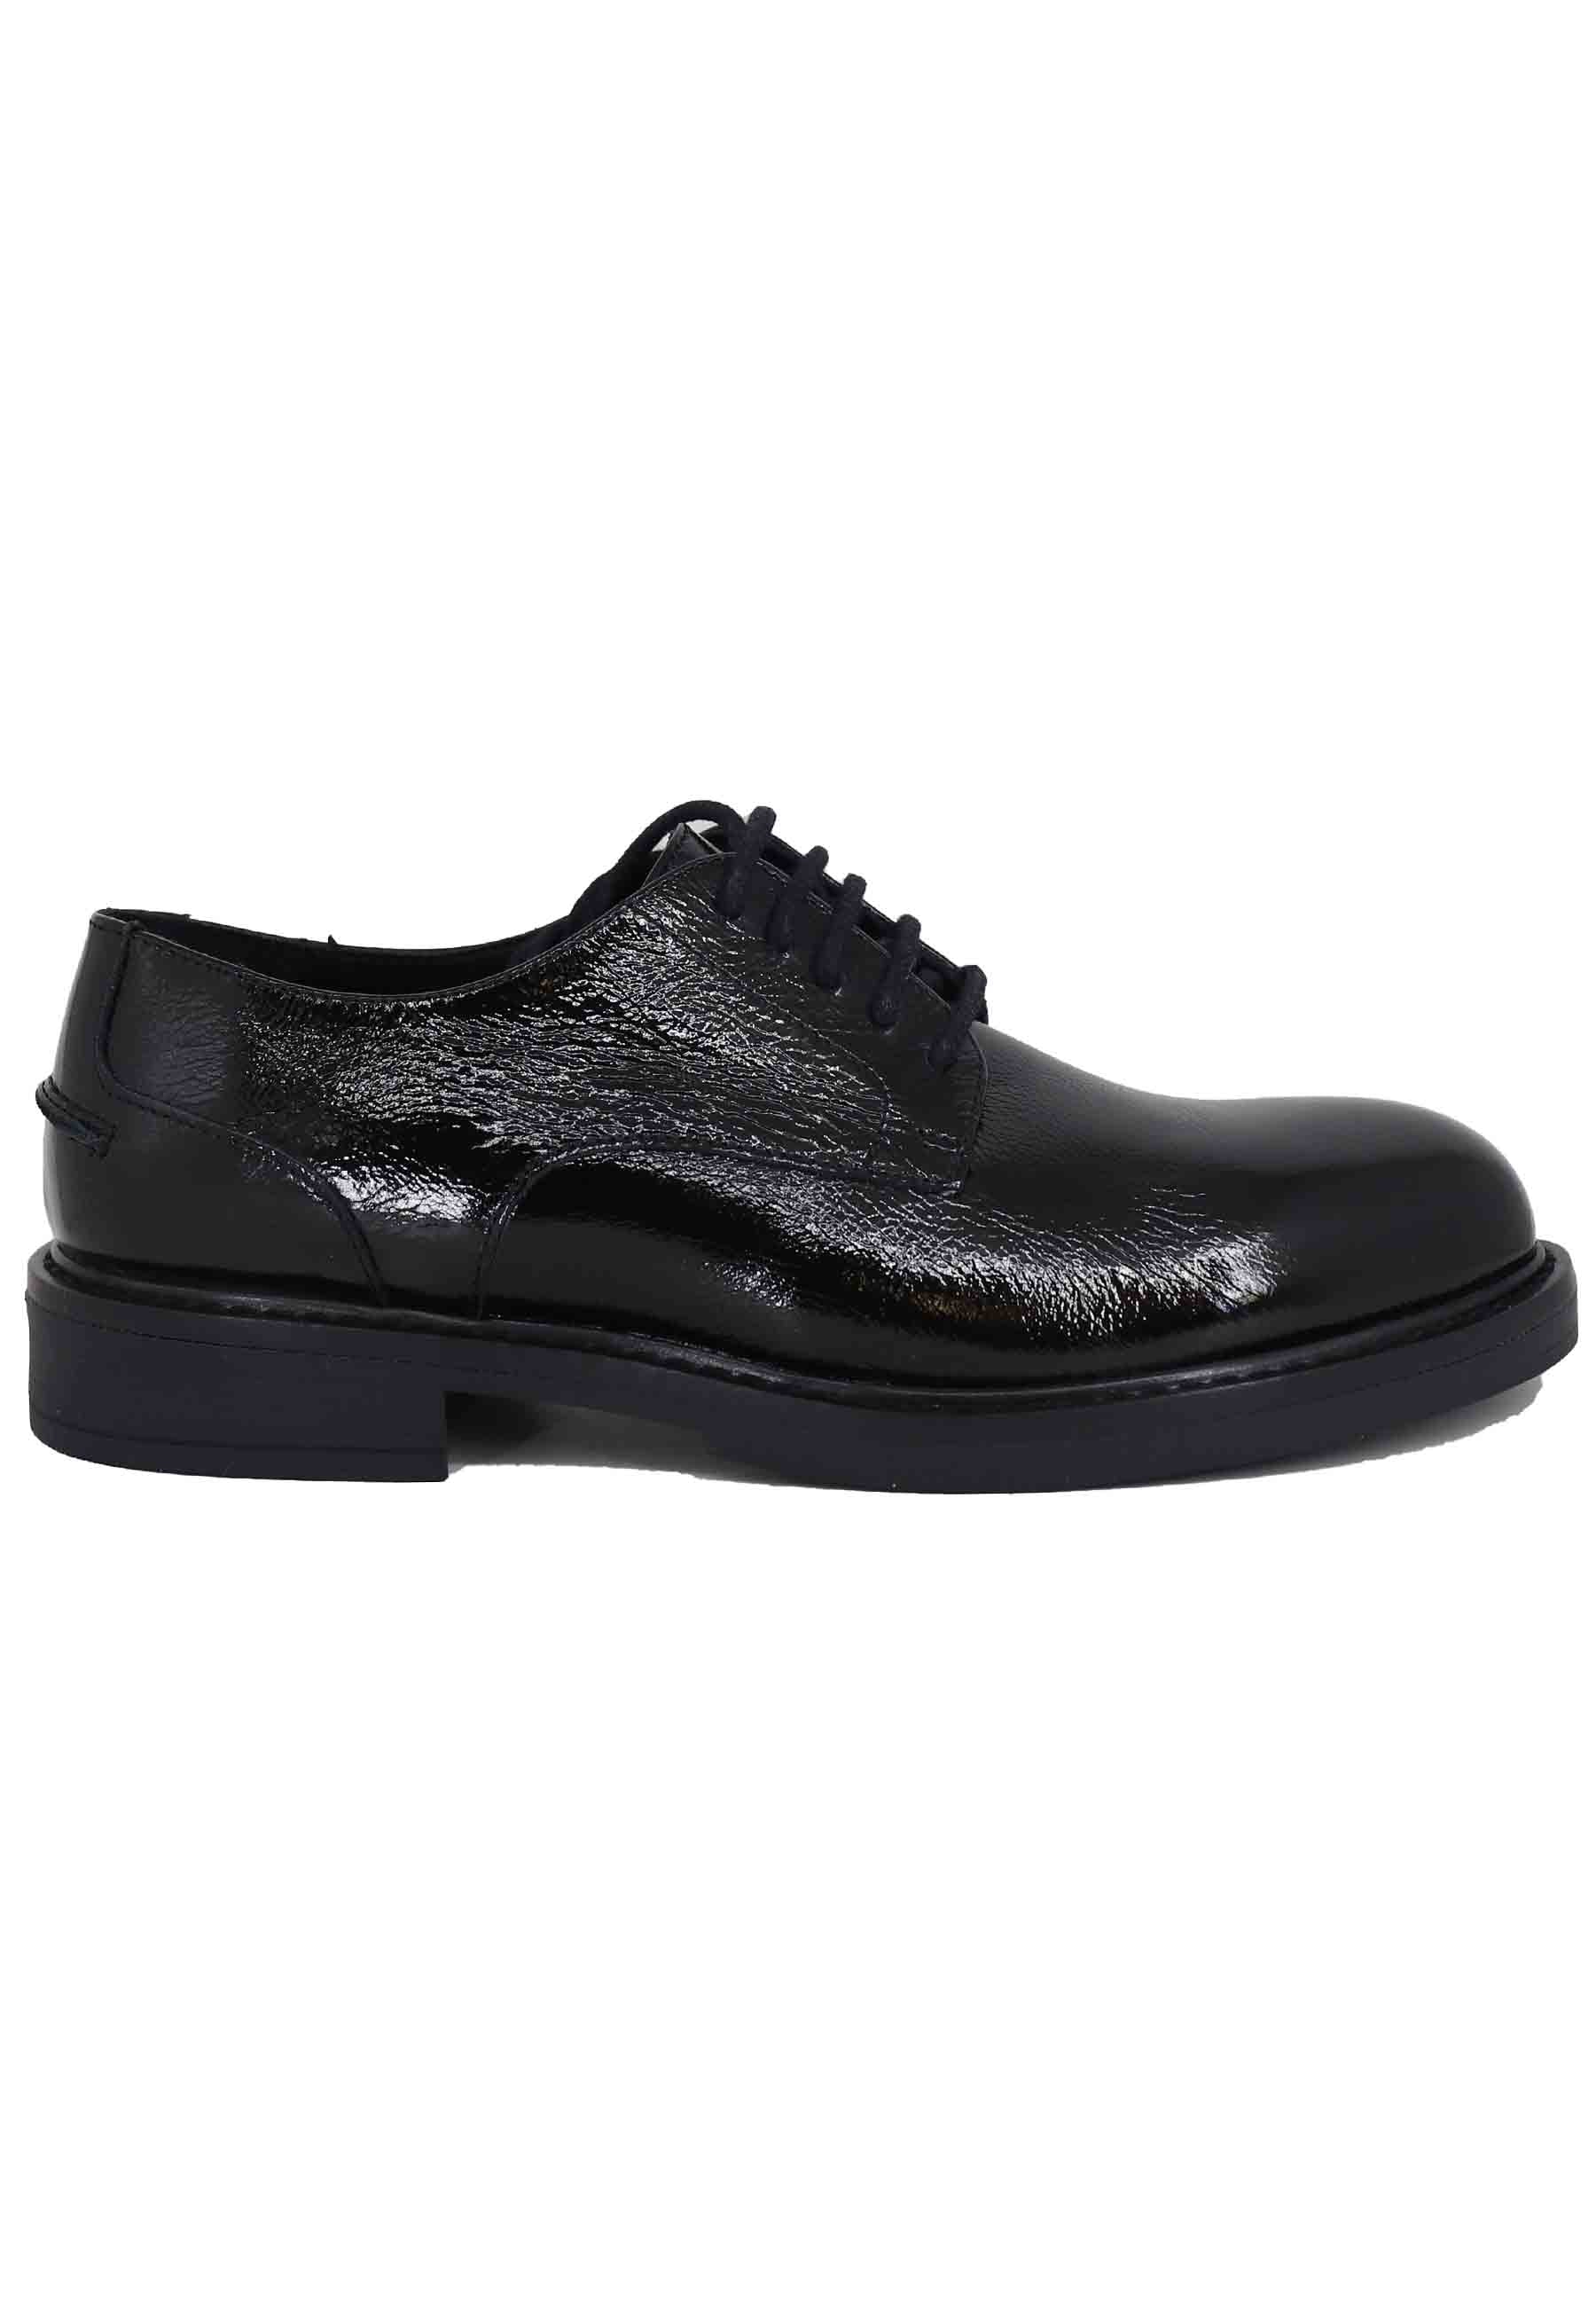 Women's lace-ups in black naplack leather with rubber sole and low heel